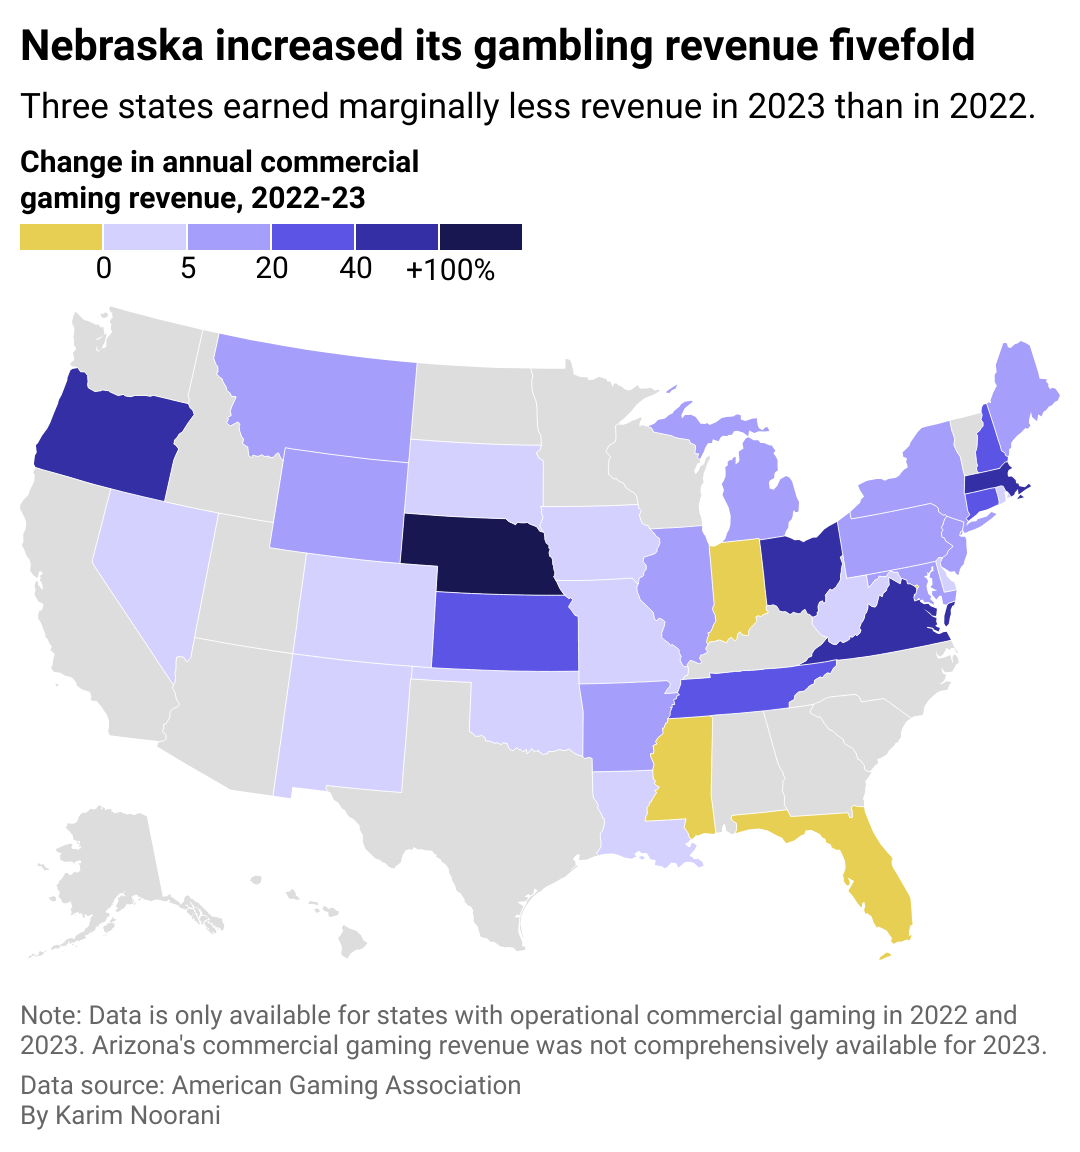 A heatmap showing commercial gaming revenue growth across the country.